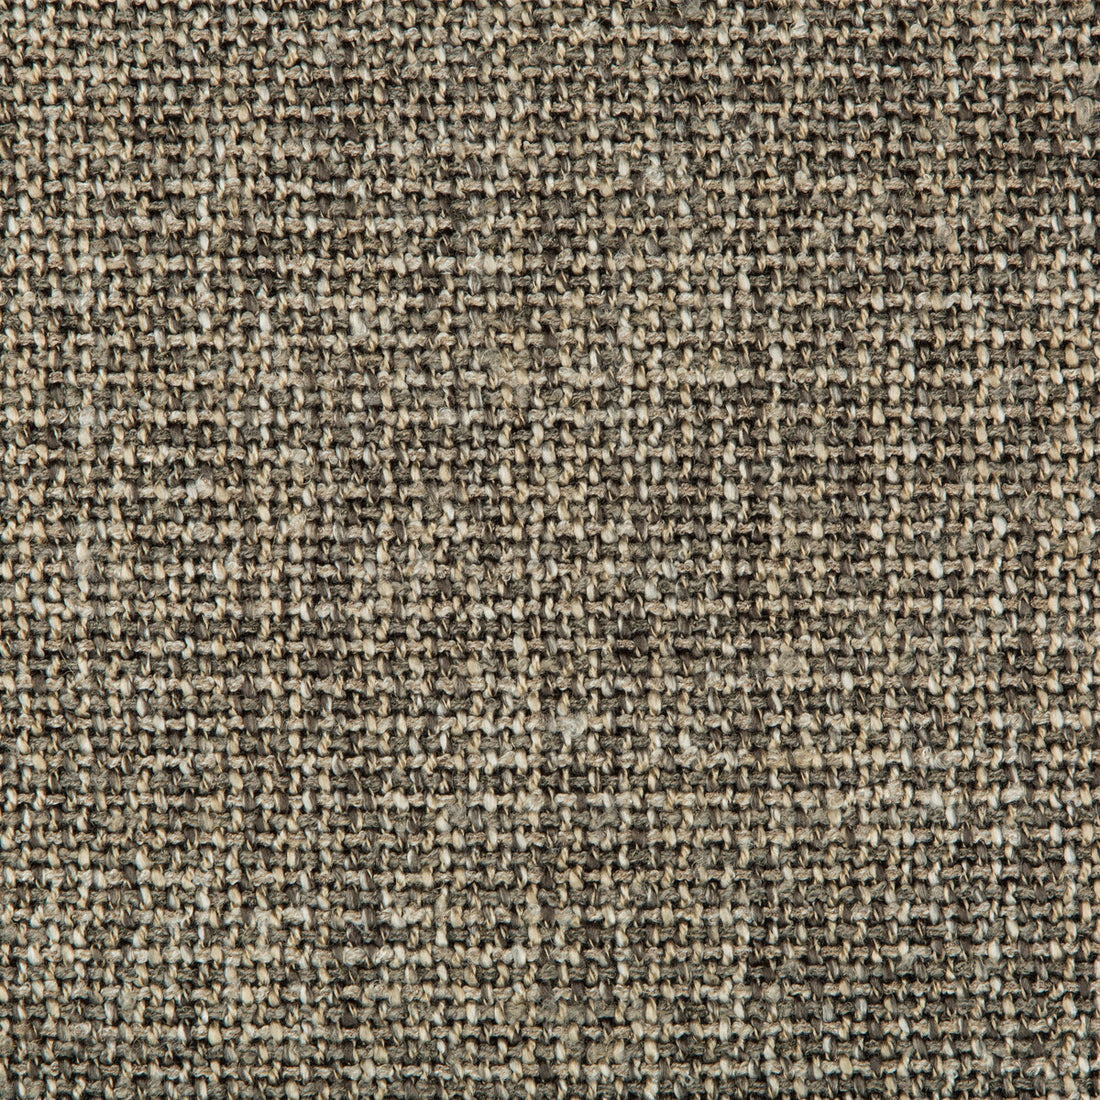 Cyncy fabric in shale color - pattern 35975.11.0 - by Kravet Design in the Barry Lantz Canvas To Cloth collection